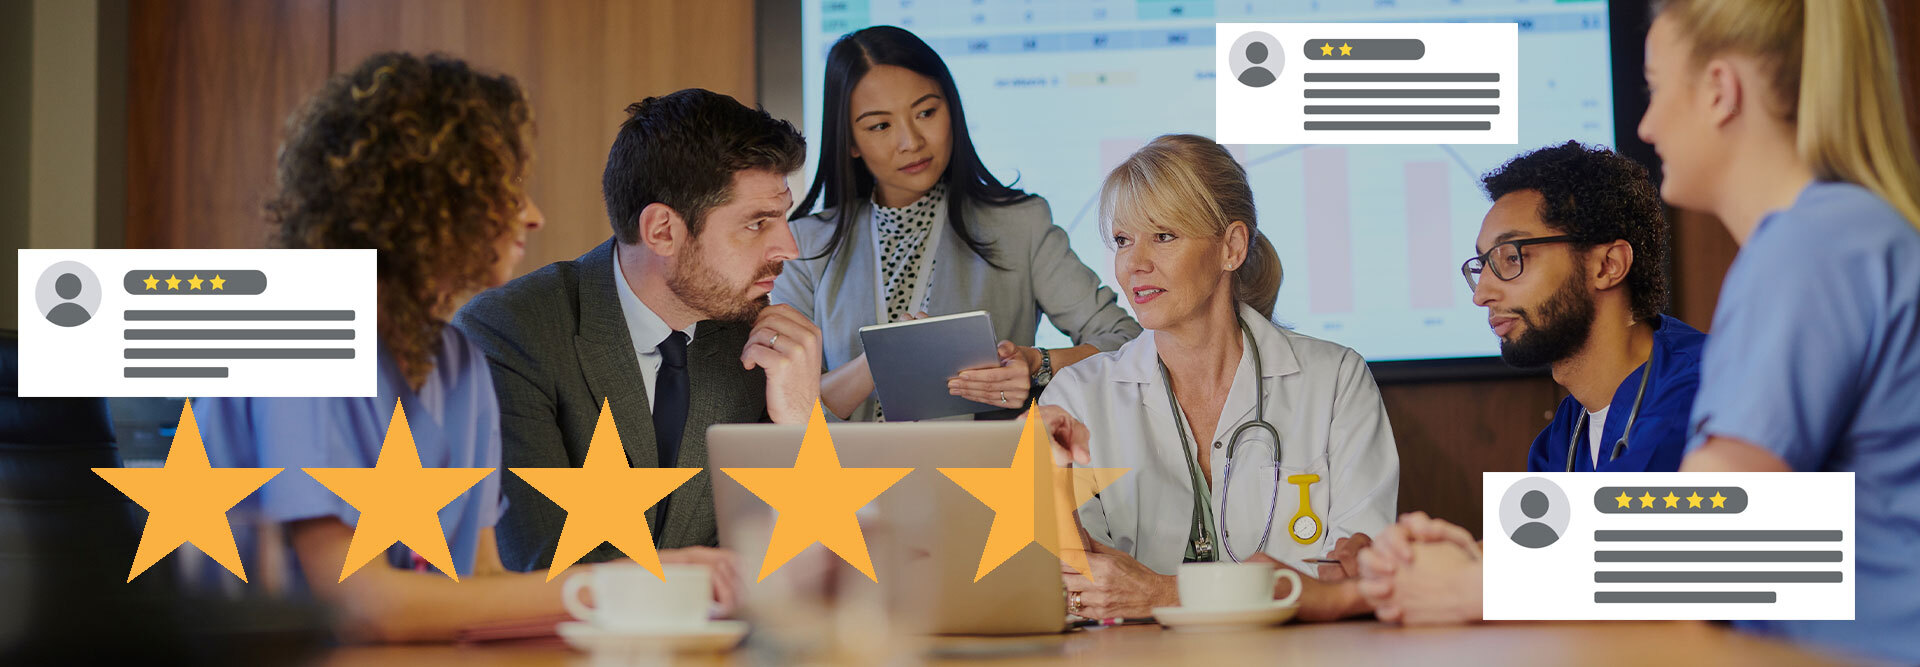 Doctor consults with her marketing team in a boardroom around a conference table, discussing top doctor review sites to manage her online reputation